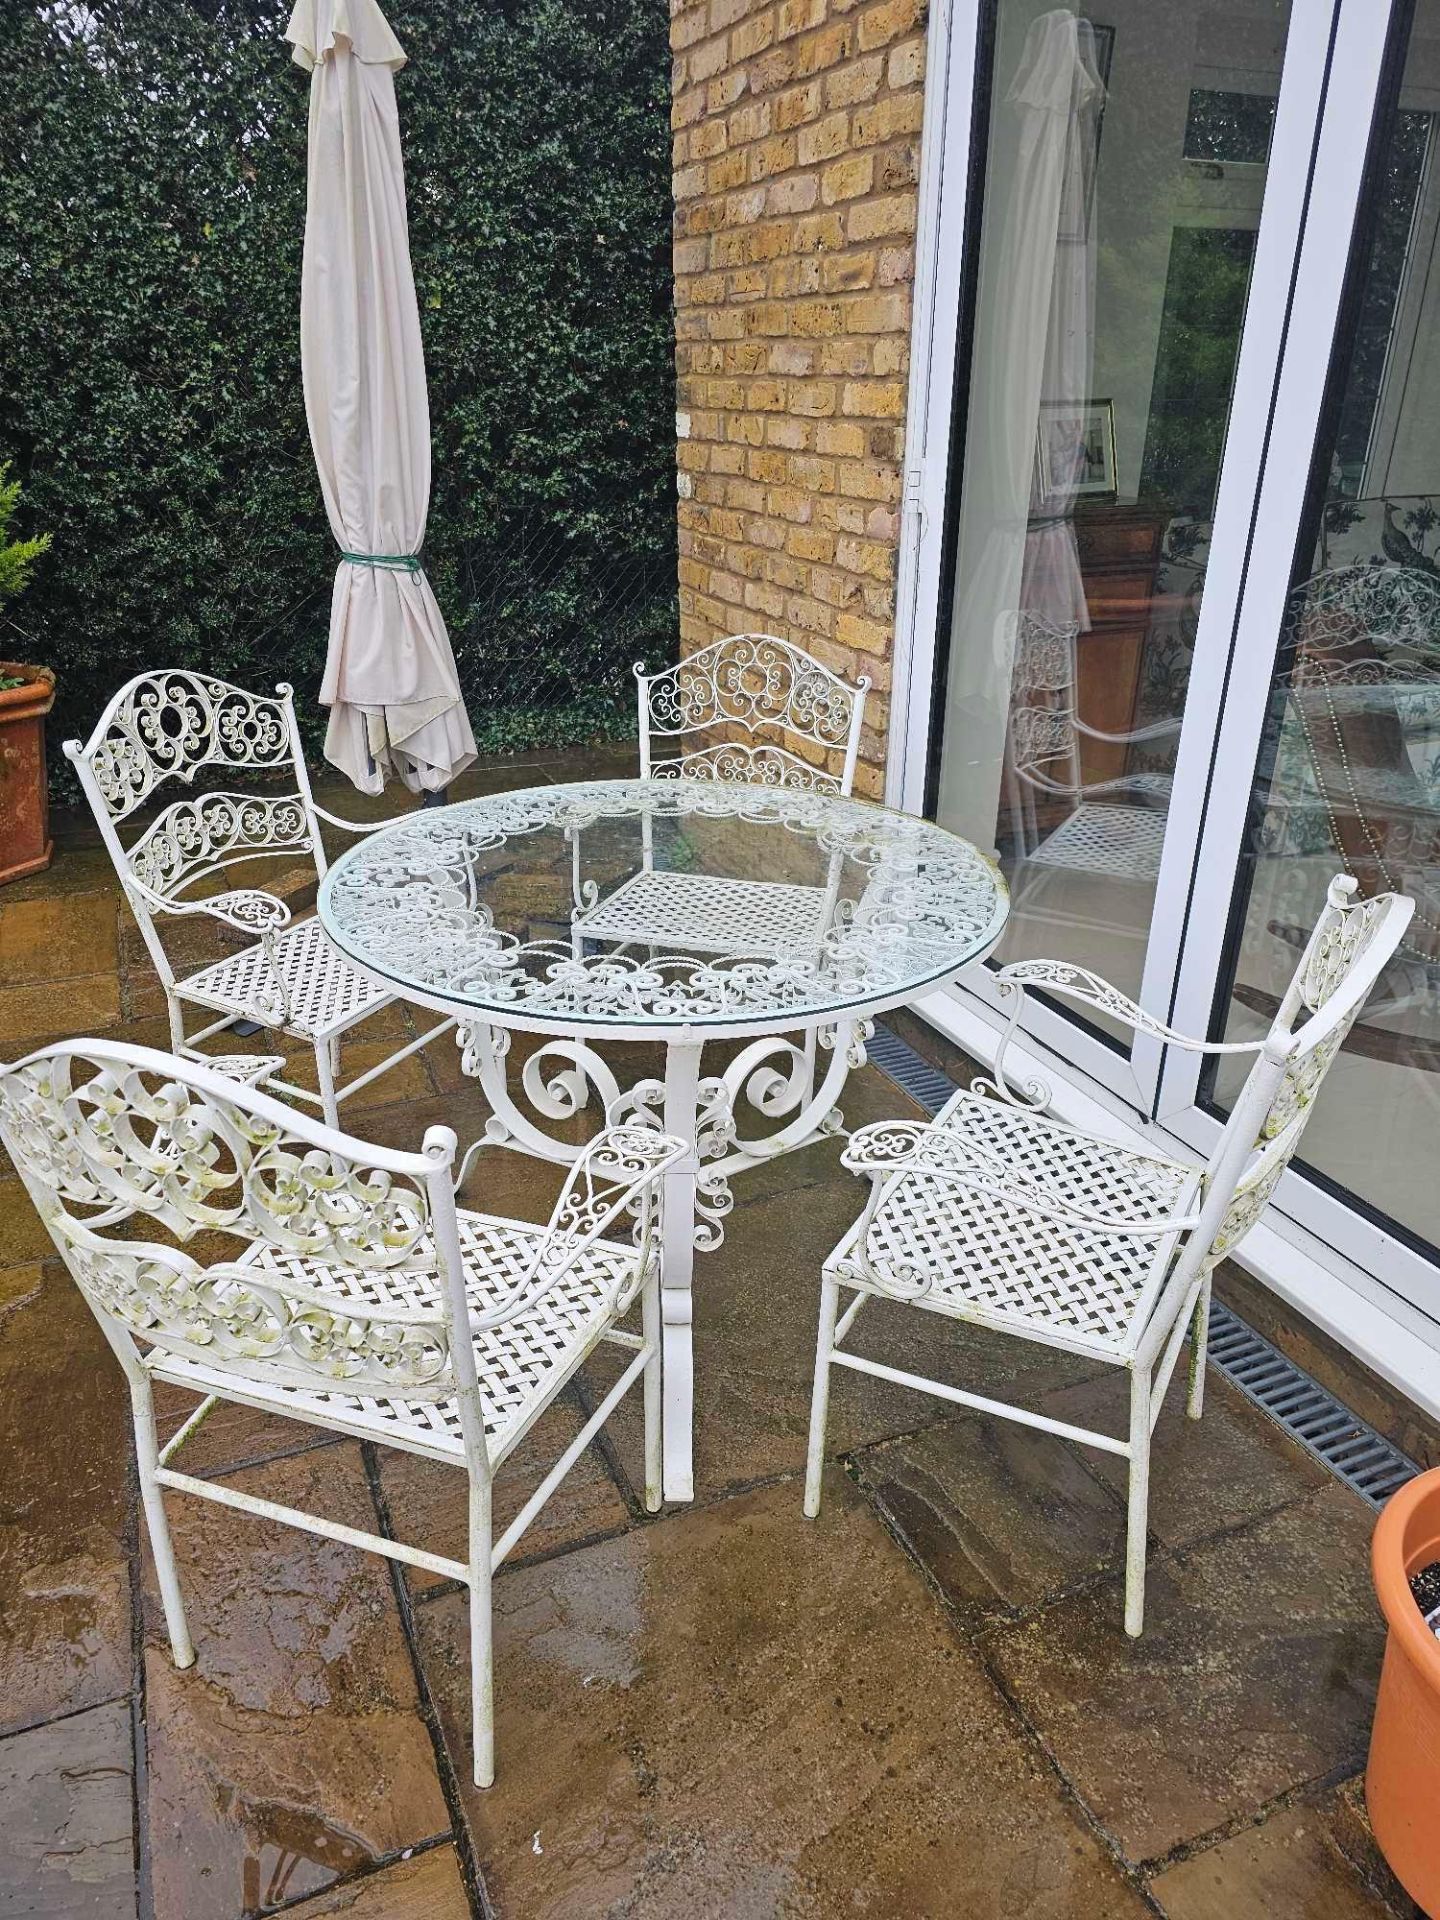 A Wrought Iron Painted White Glass Topped Garden Table Complete With 4 Chairs And A Parasol With